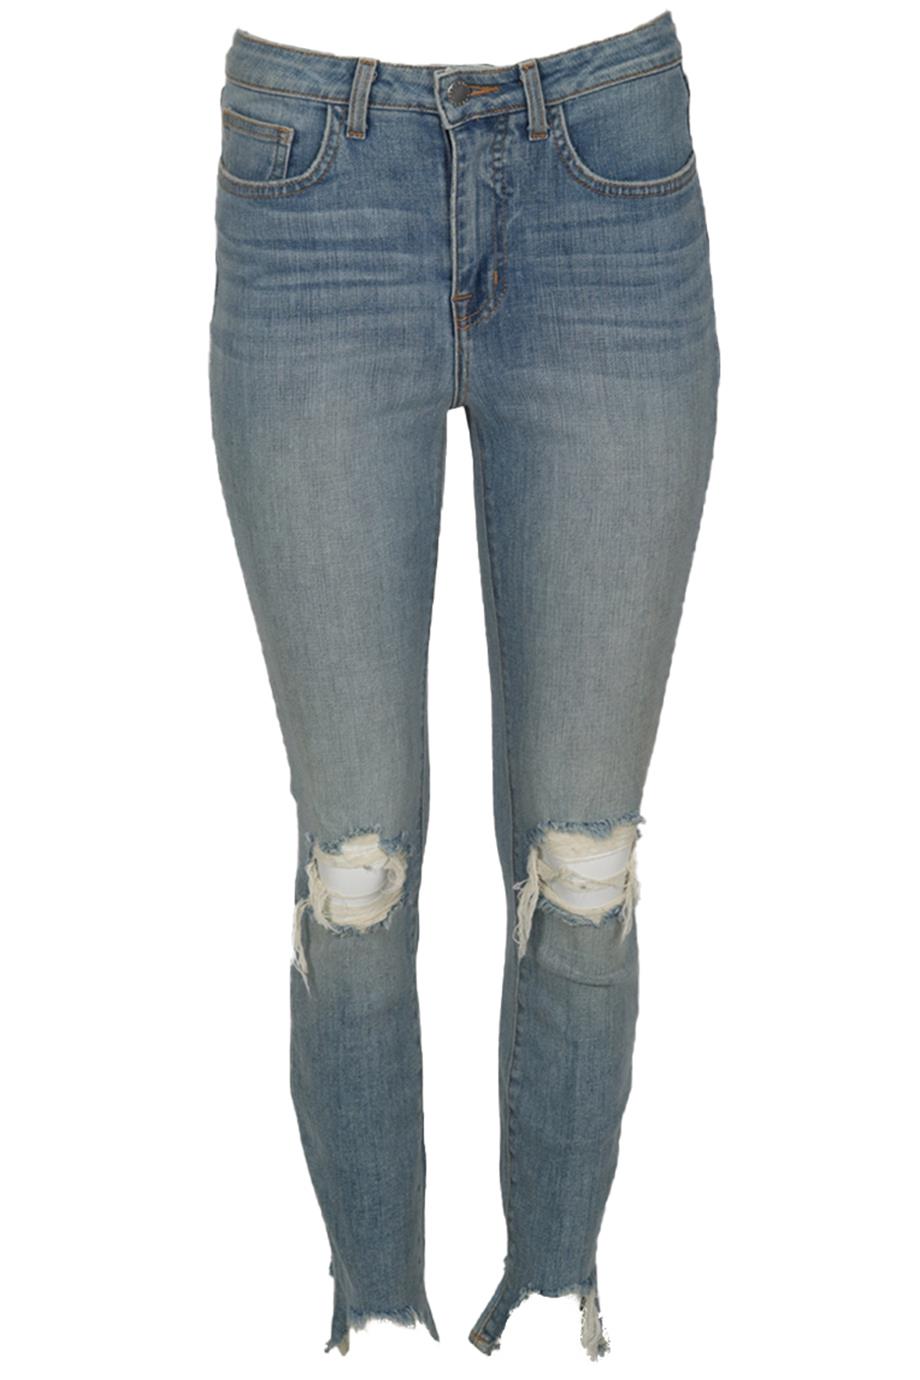 L'AGENCE DISTRESSED HIGH RISE SKINNY JEANS W26 UK 8